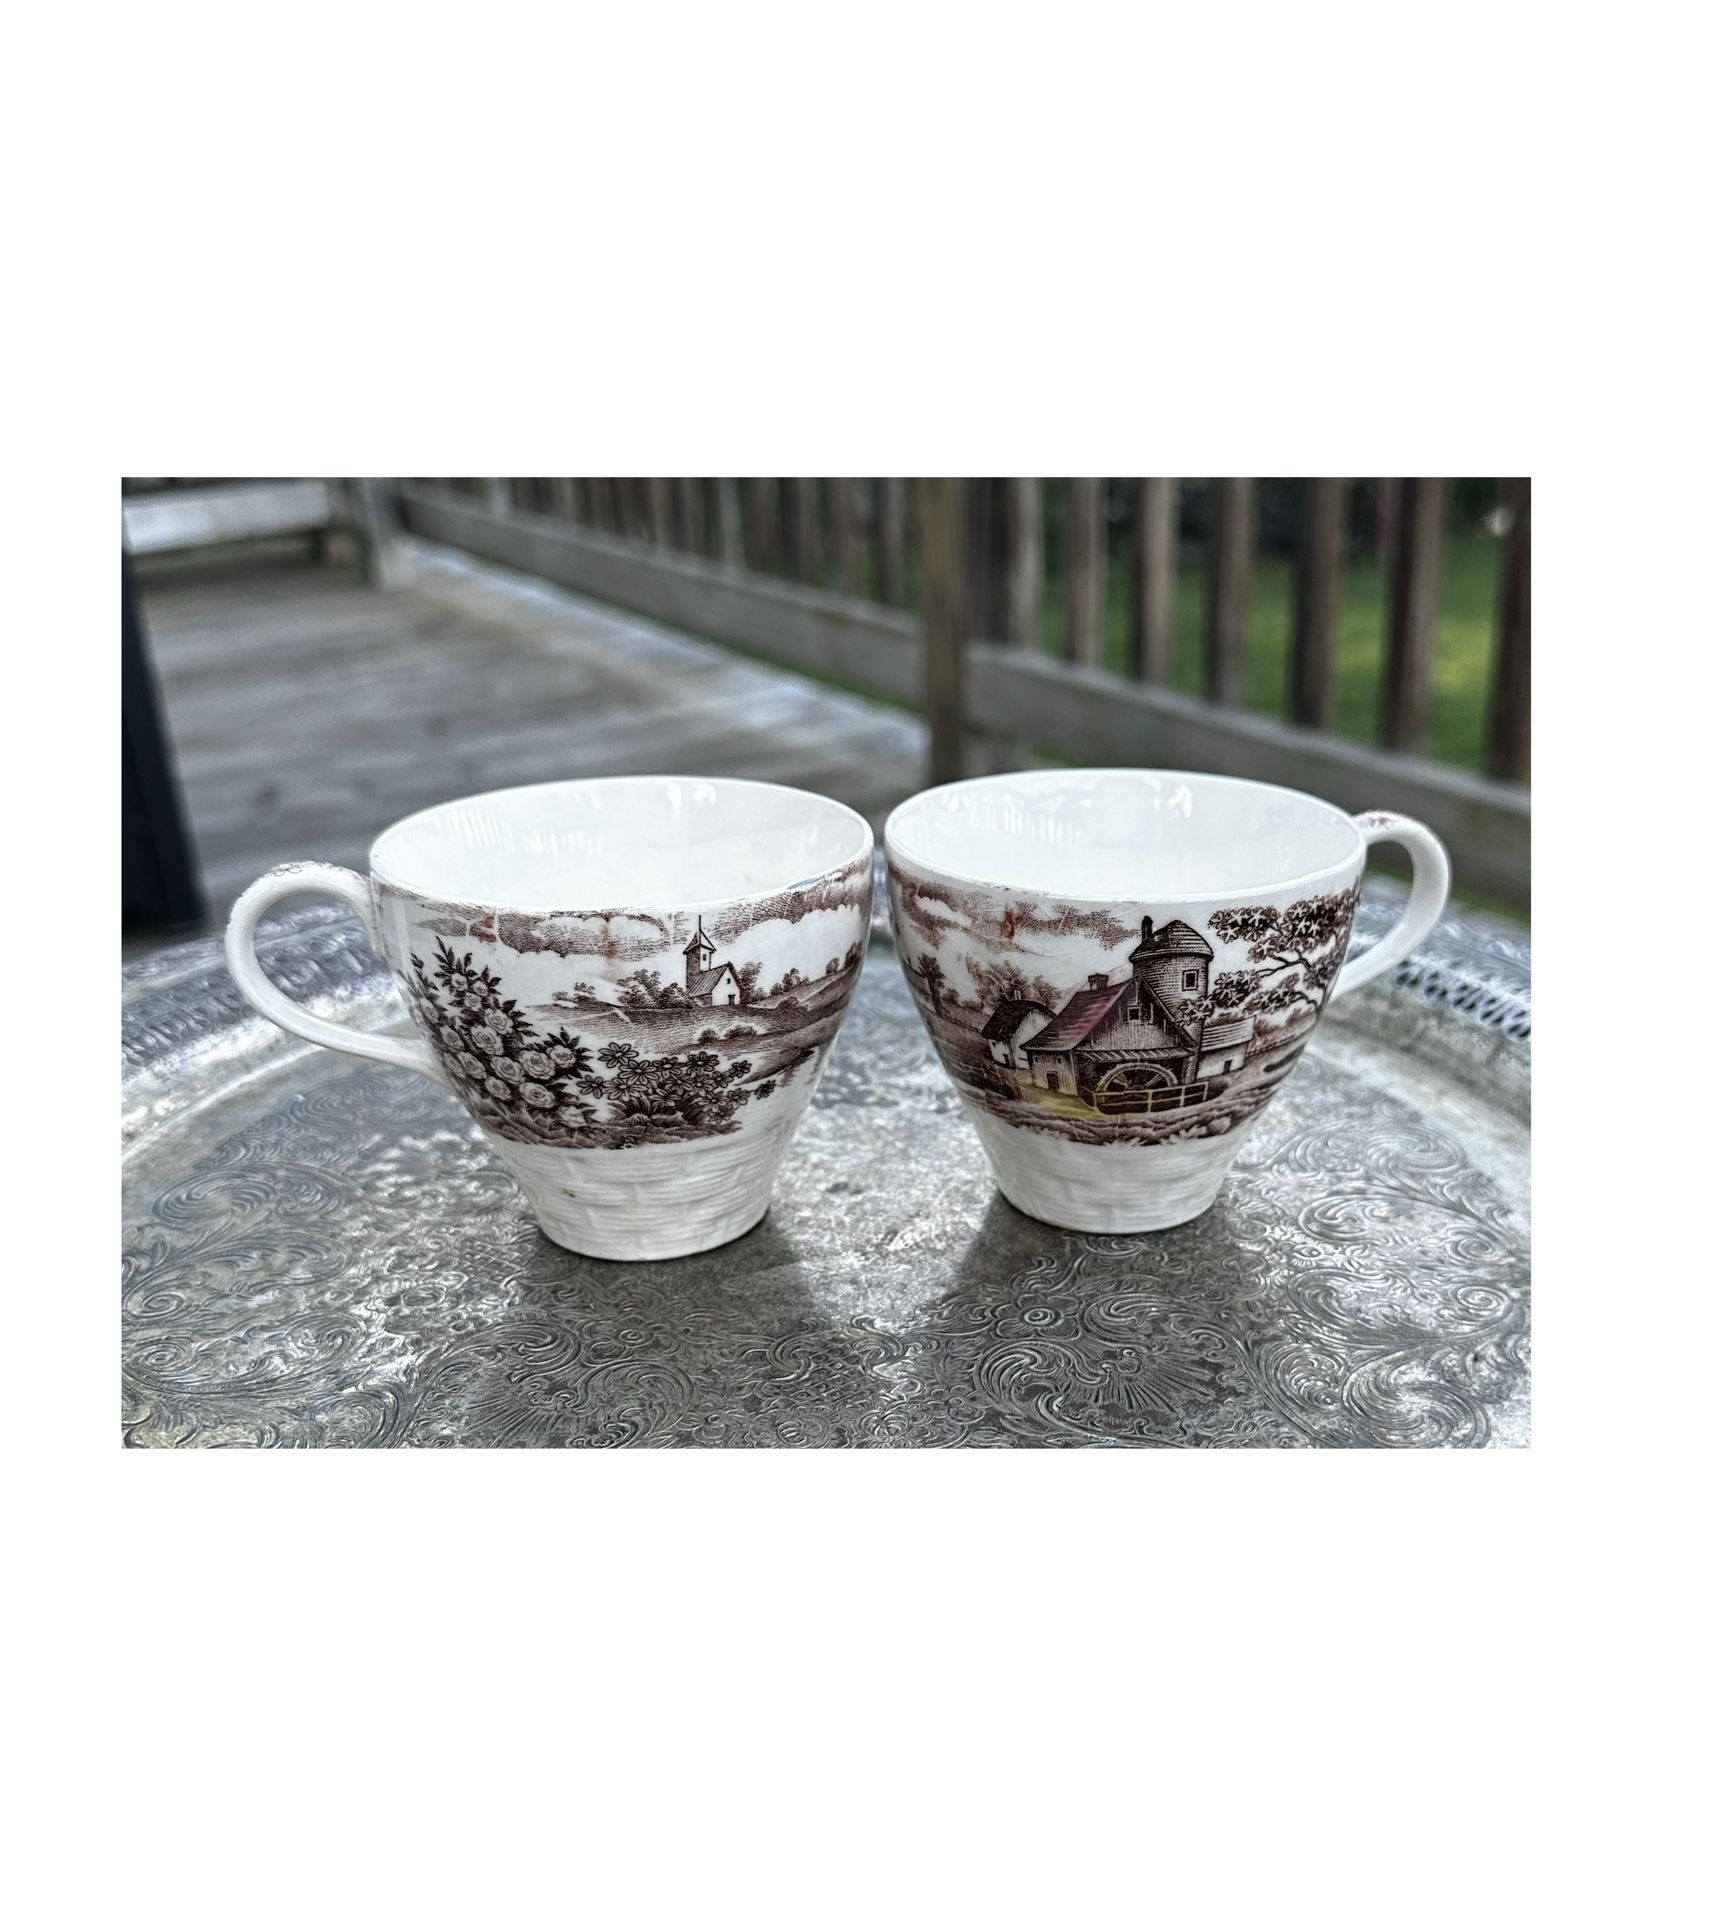 Vintage Old Mill Proof Teacups Coffee Cups  by Wales Japan 1950’s Set of 2